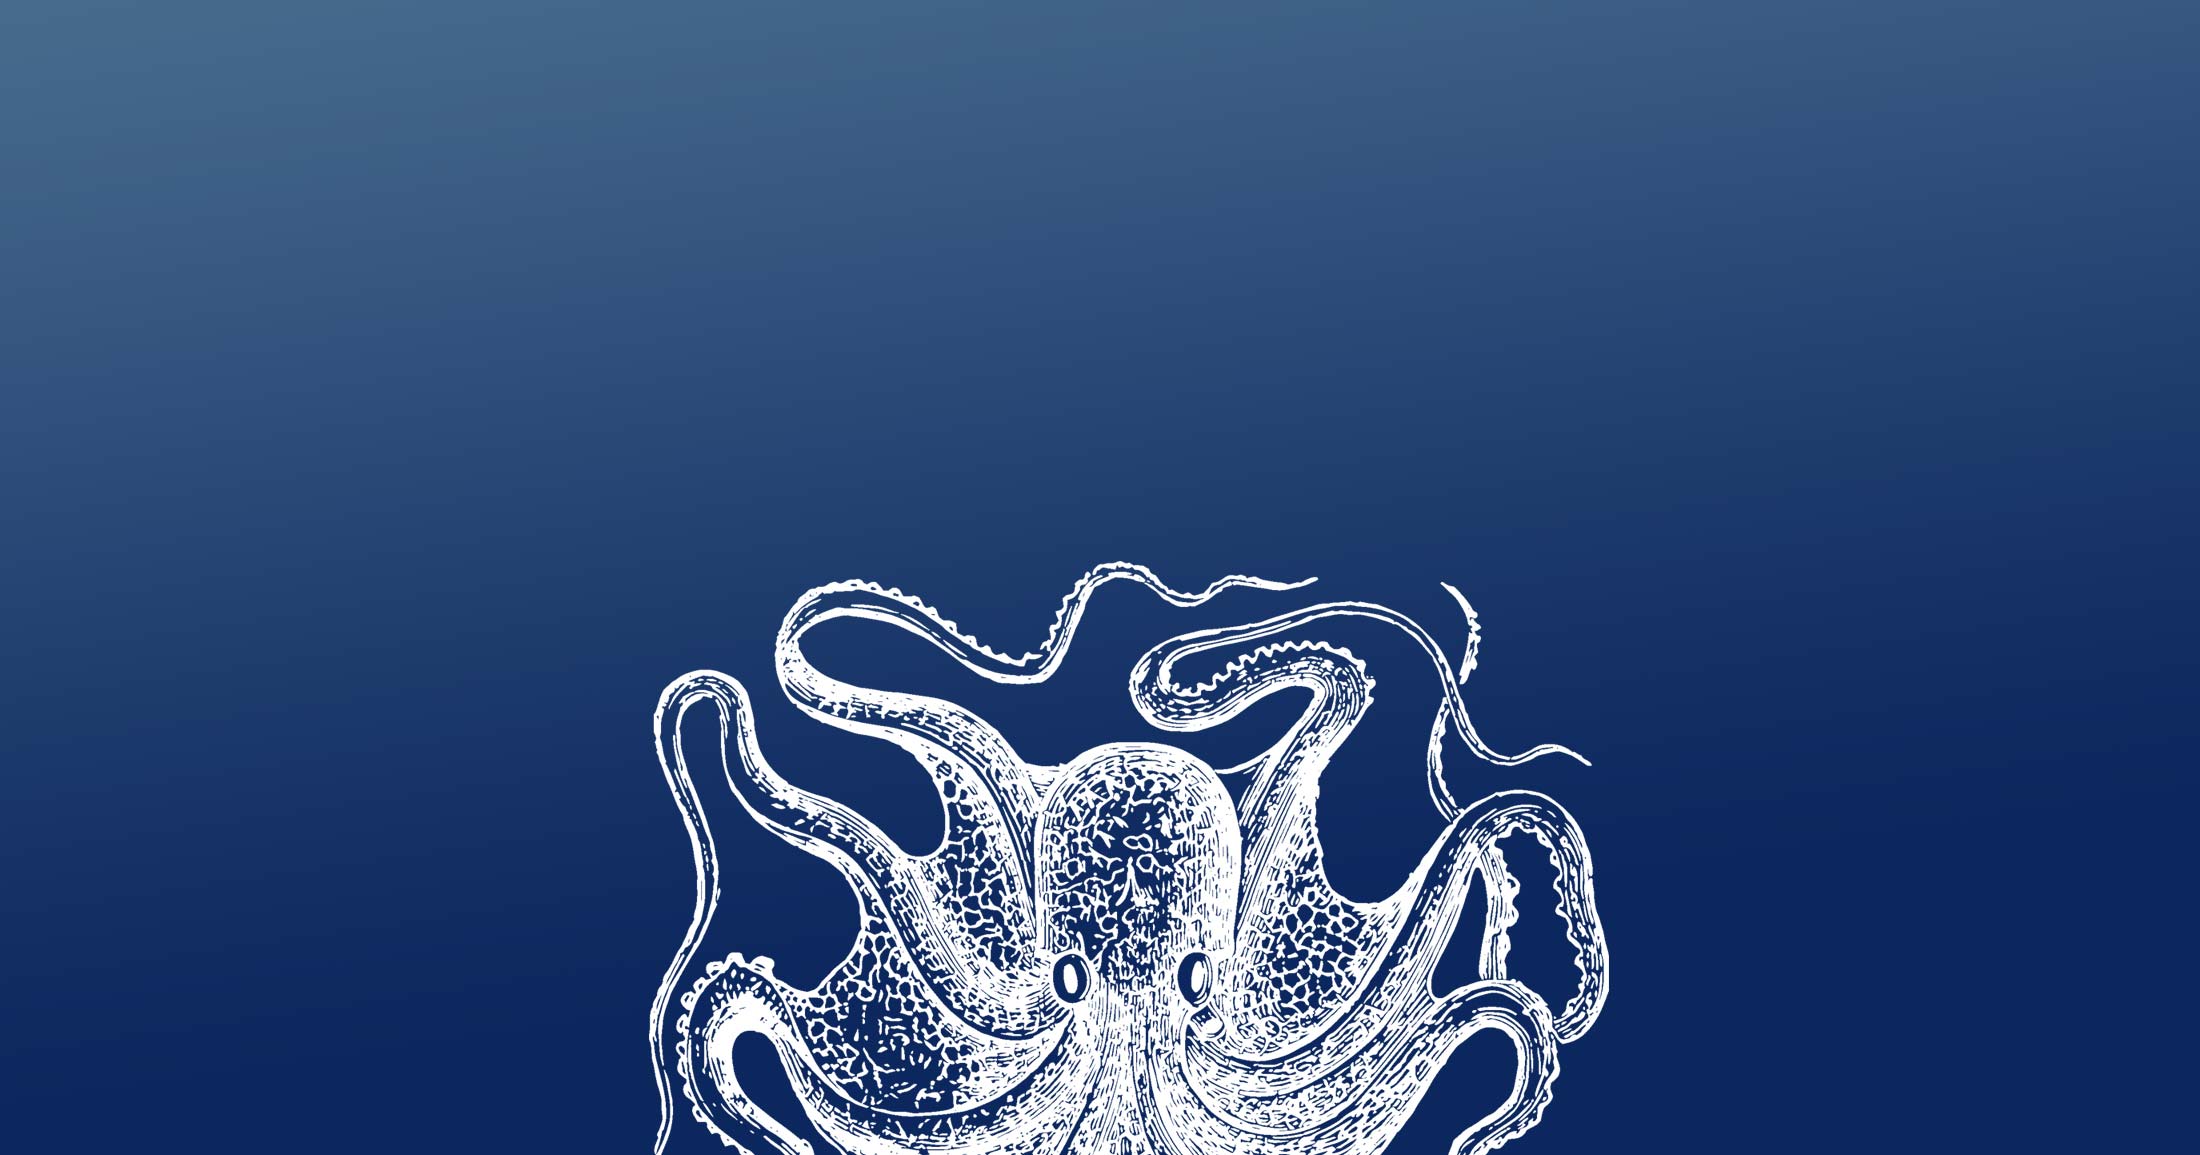 Drawing of a detailed octopus sprawling along the bottom of the image, in white.